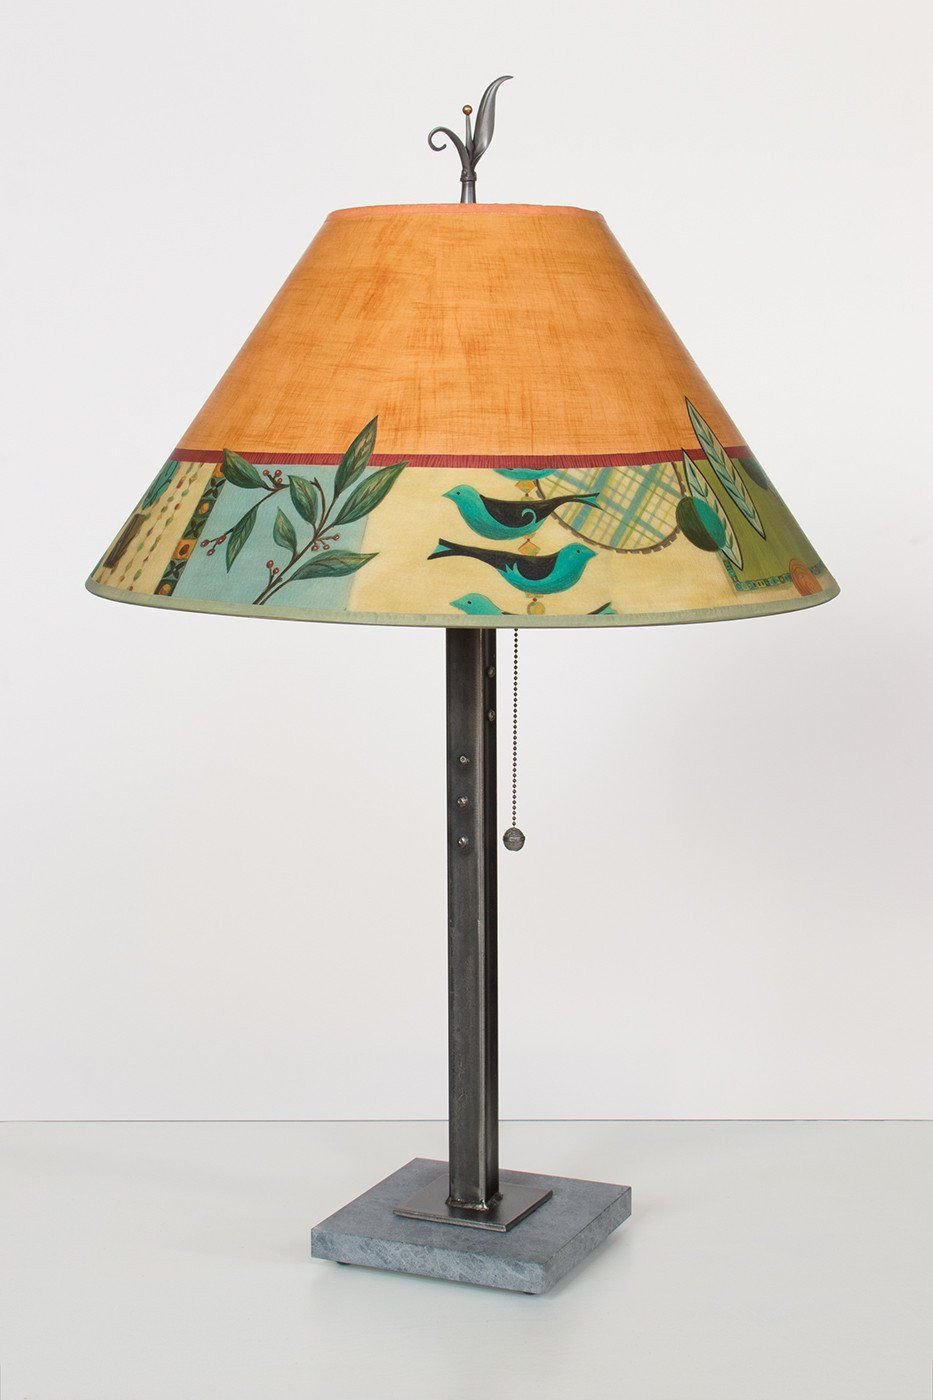 Steel Table Lamp on Italian Marble with Large Conical Shade in Spring Medley Spice